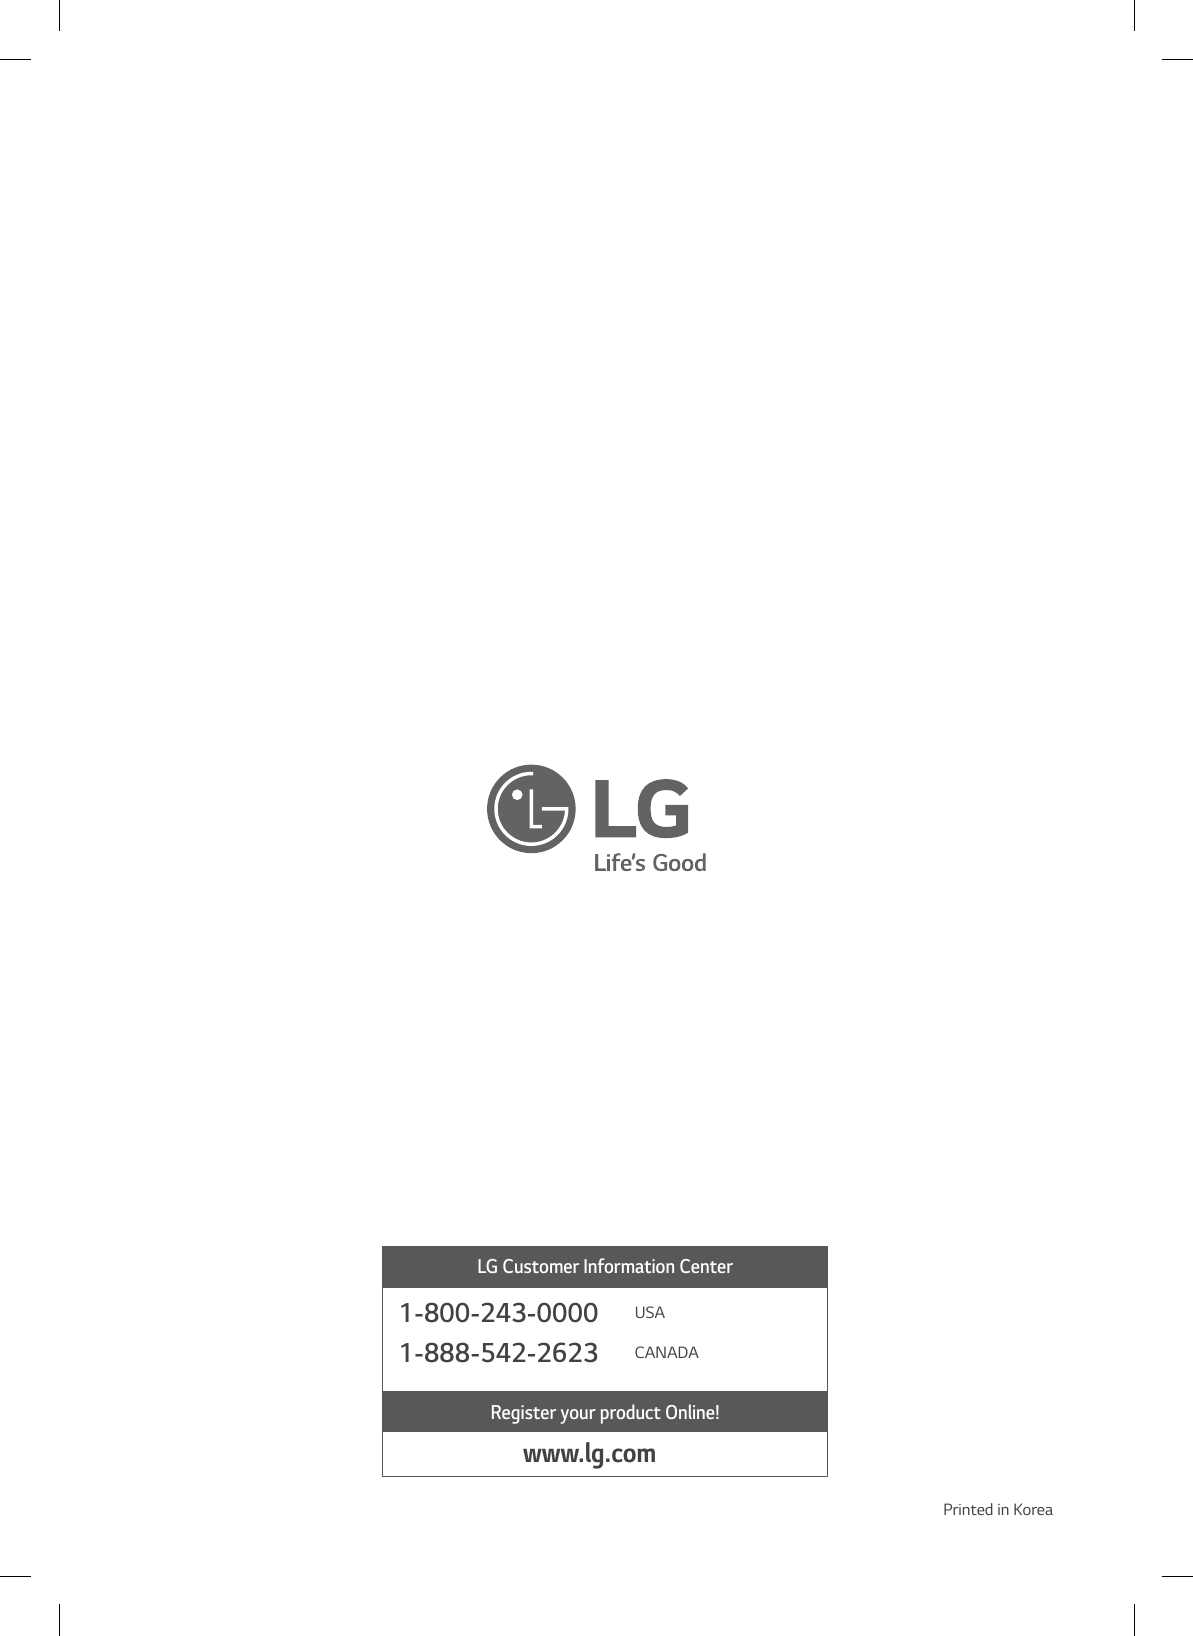 LG Customer Information CenterRegister your product Online!www.lg.com1-800-243-0000 USA1-888-542-2623 CANADAPrinted in Korea